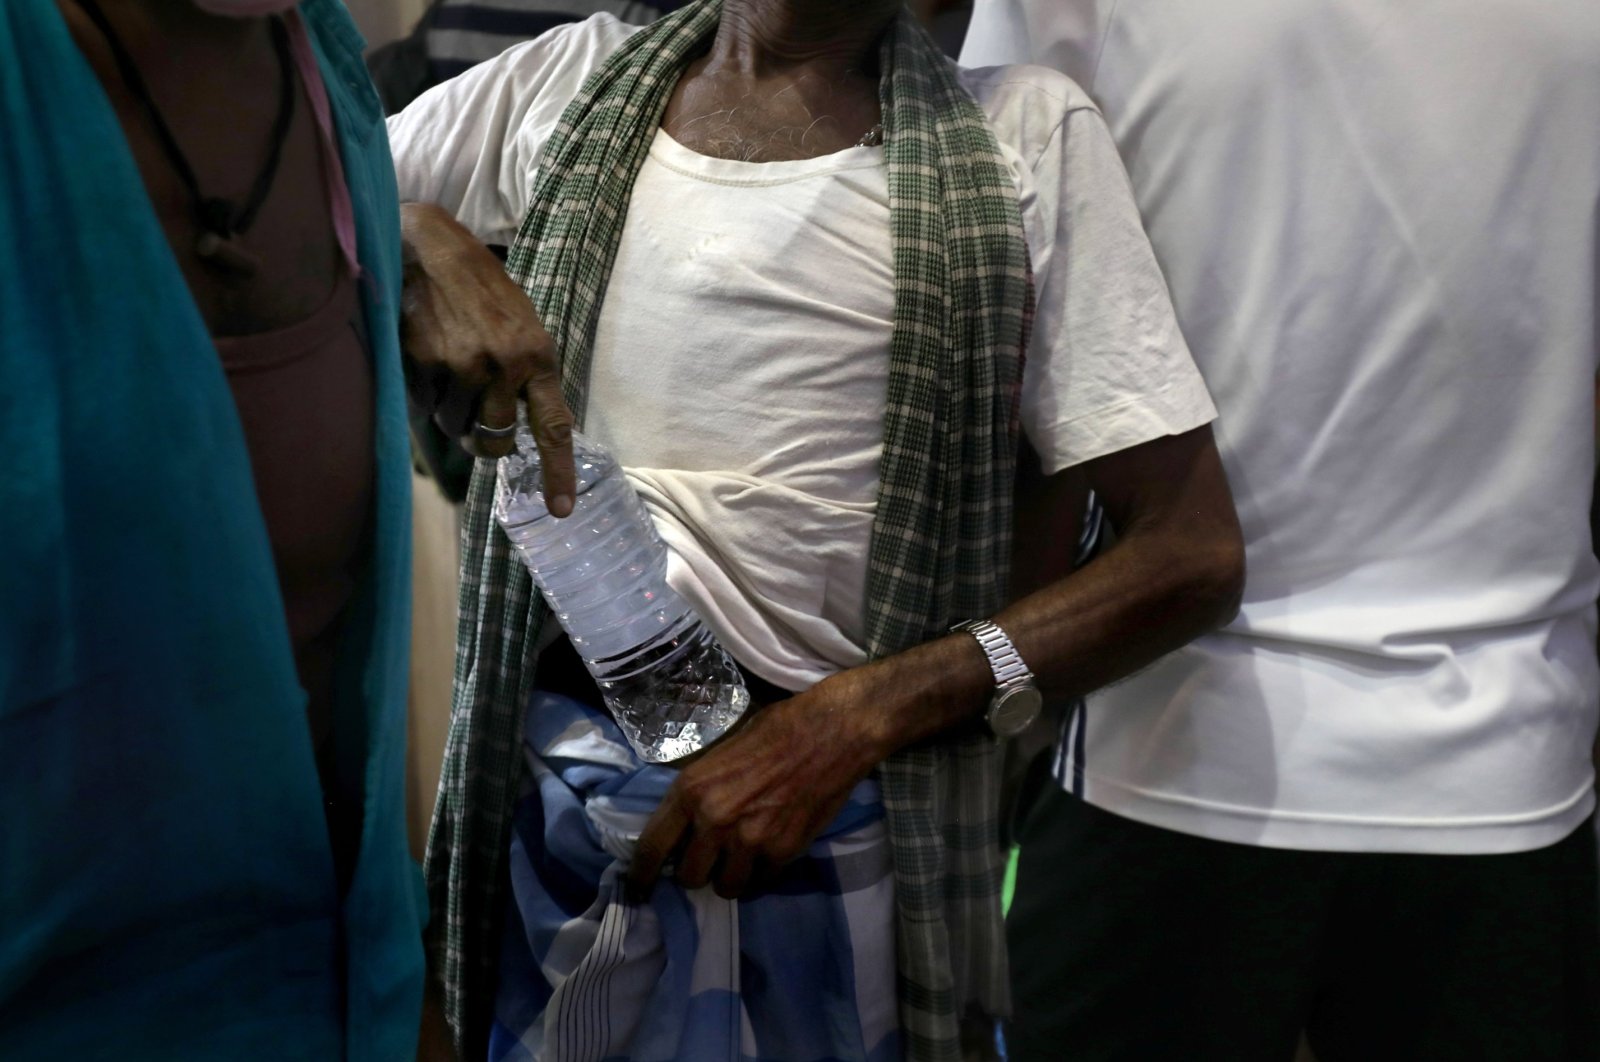 A customer carries a bottle after buying alcohol at a liquor store in Kolkata, eastern India, May 15, 2021. (EPA Photo)